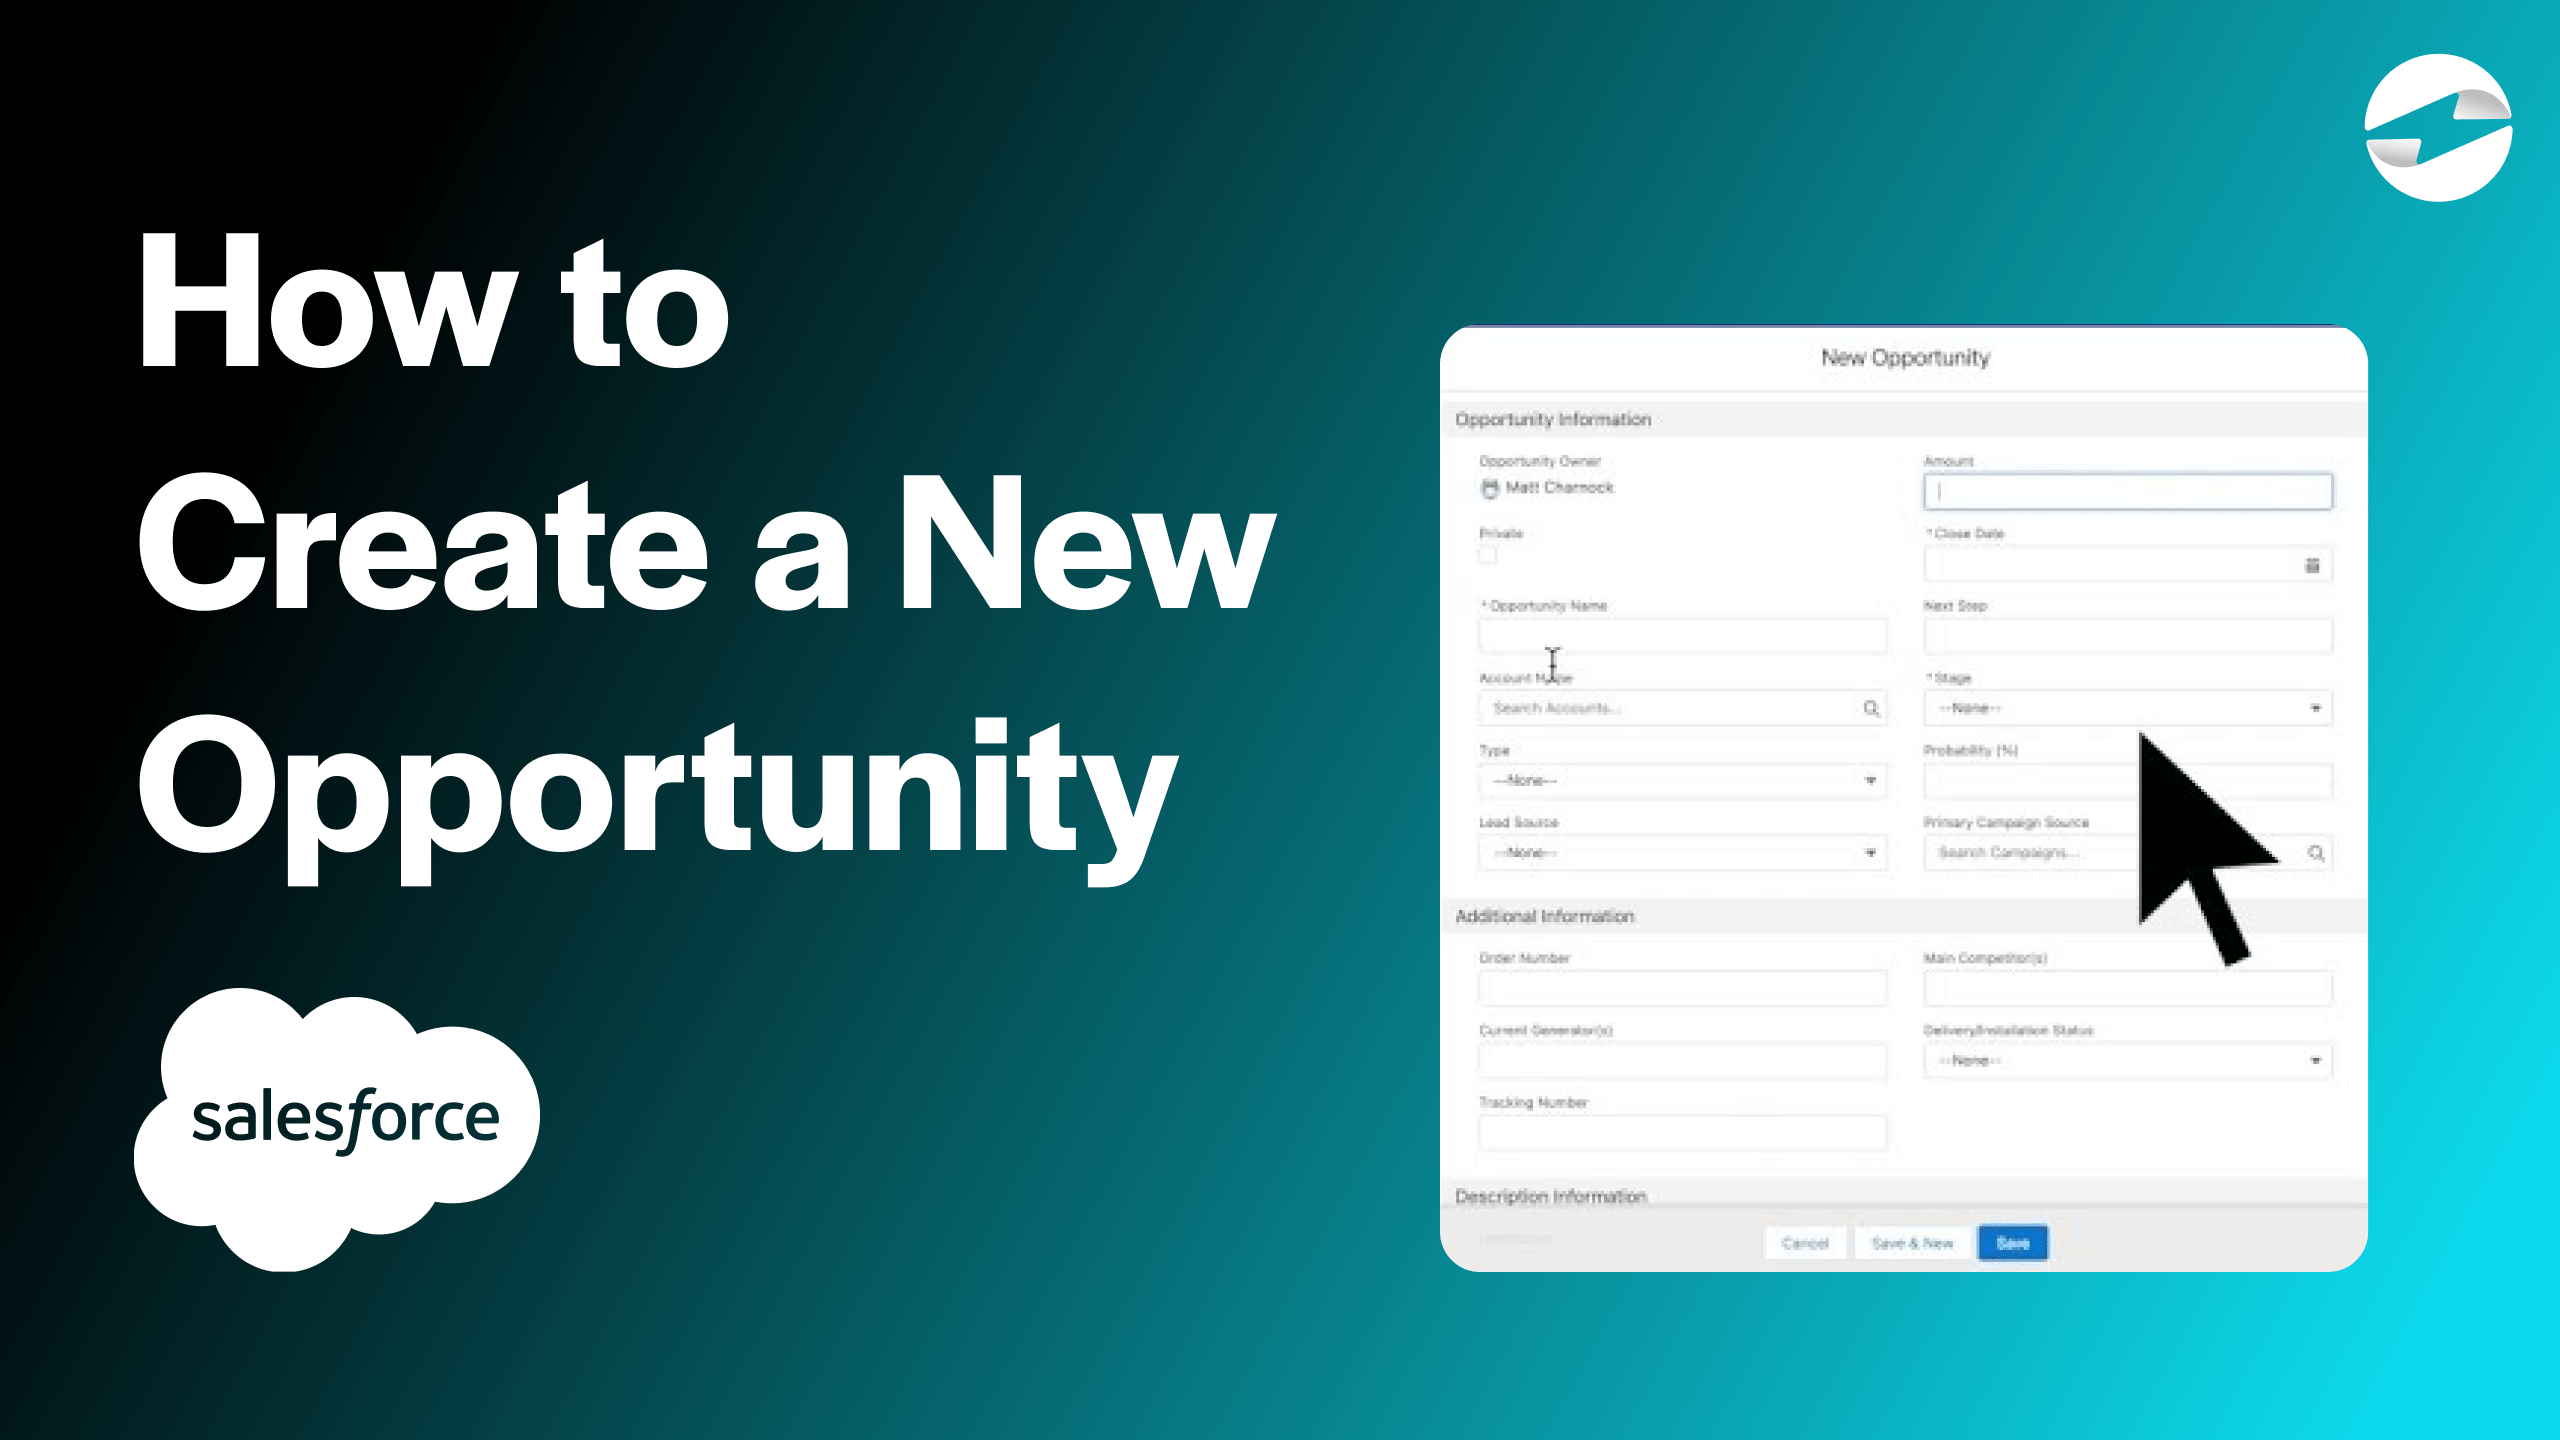 How to Create a New Opportunity - Salesforce